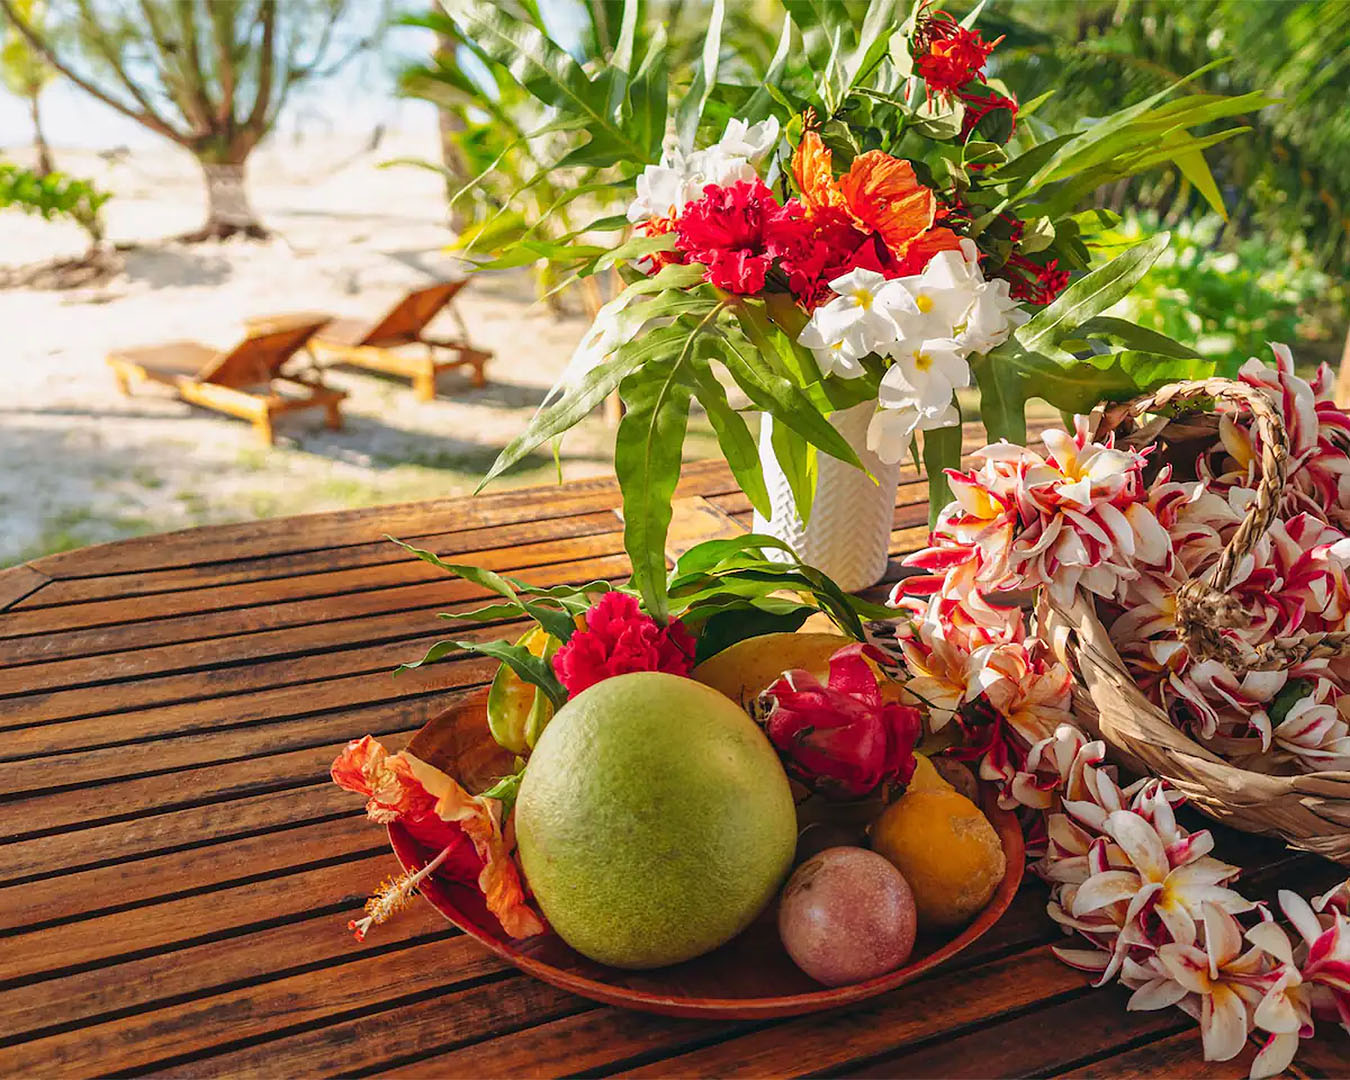 Fresh fruit on a table with sunloungers on the beach in the background.